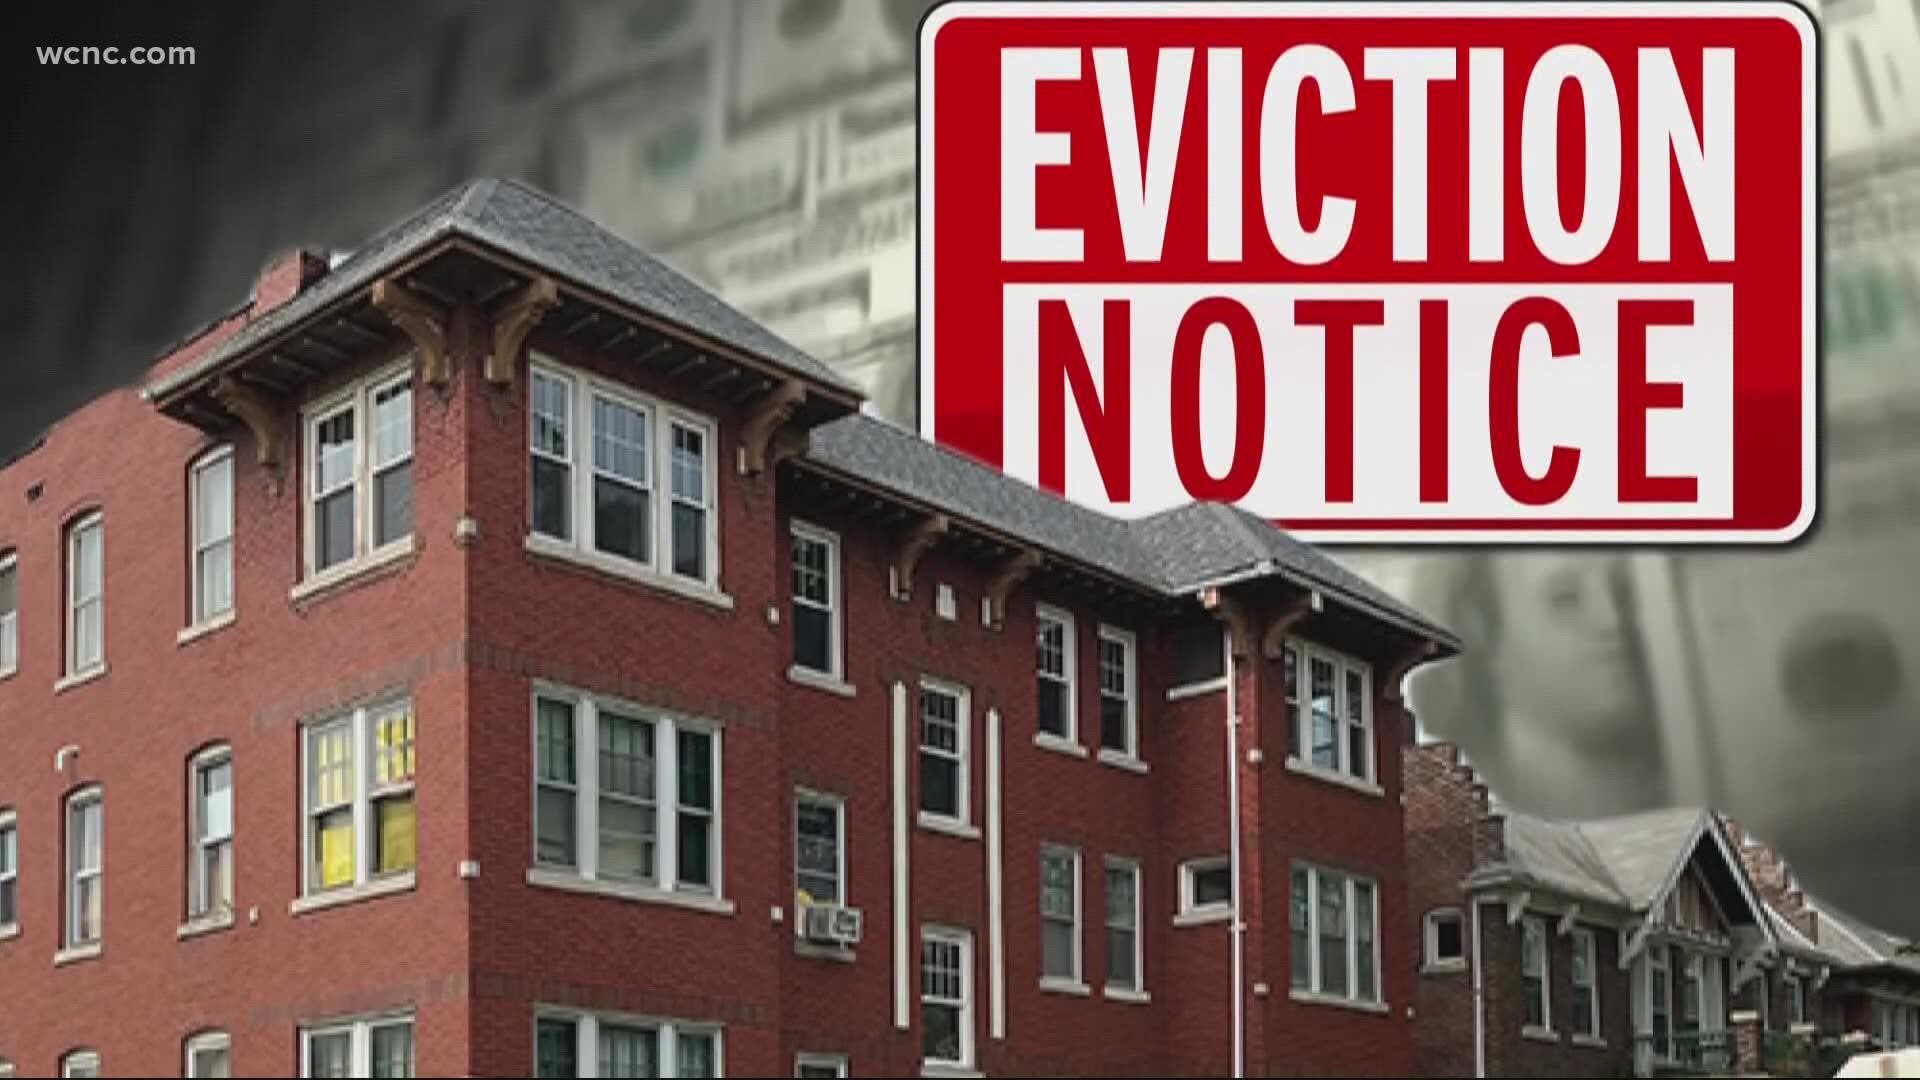 While eviction cases have dramatically slowed due to the moratorium, they're about to pick up again as courts begin scheduling cases that have been delayed.